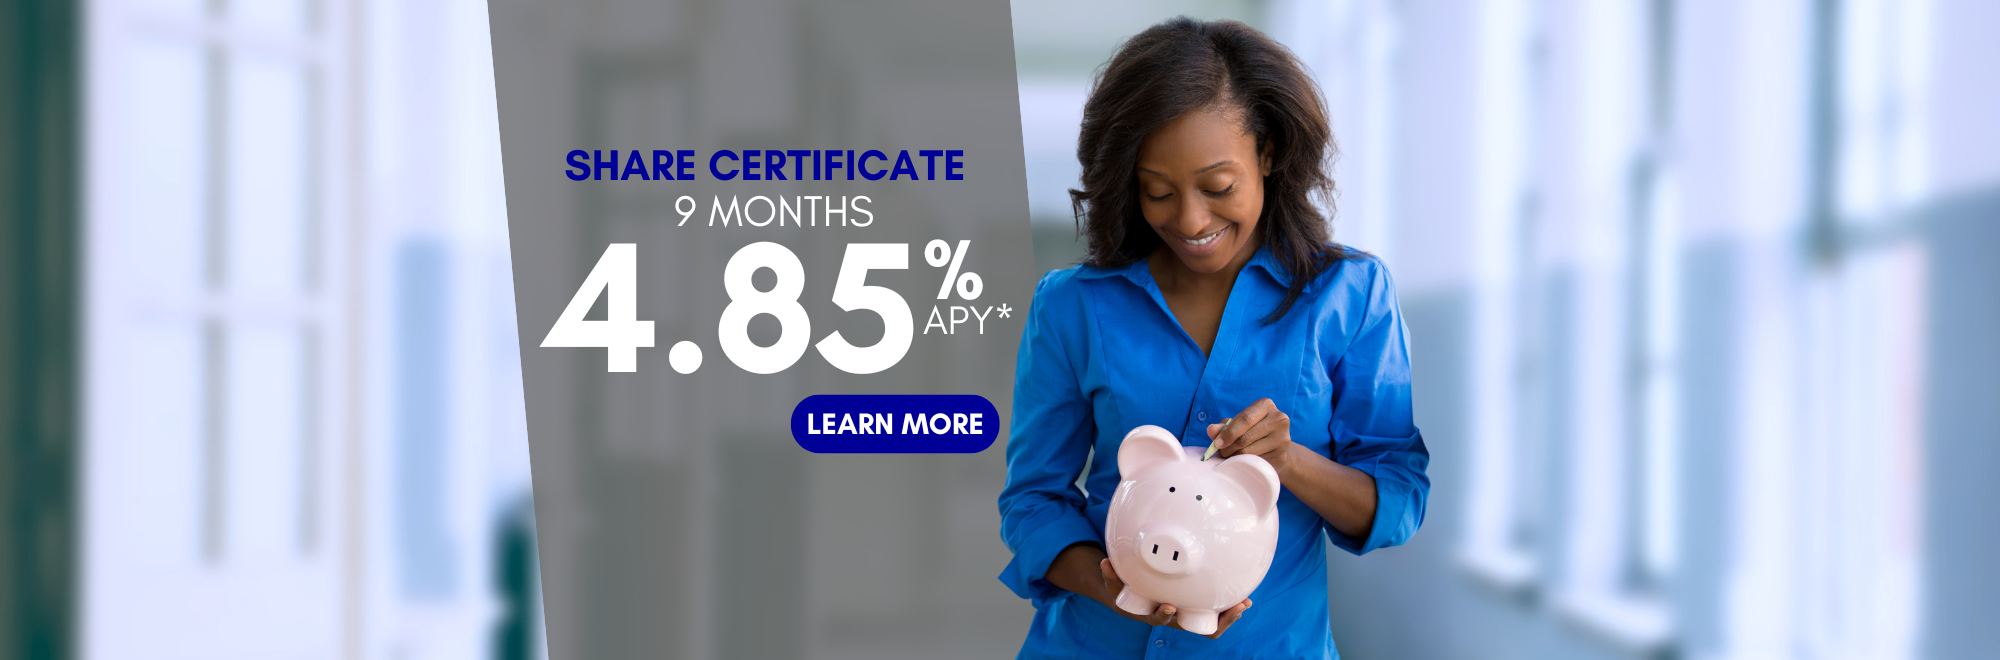 Share Certificate 9 months 4.85 %APY* Click to learn more.